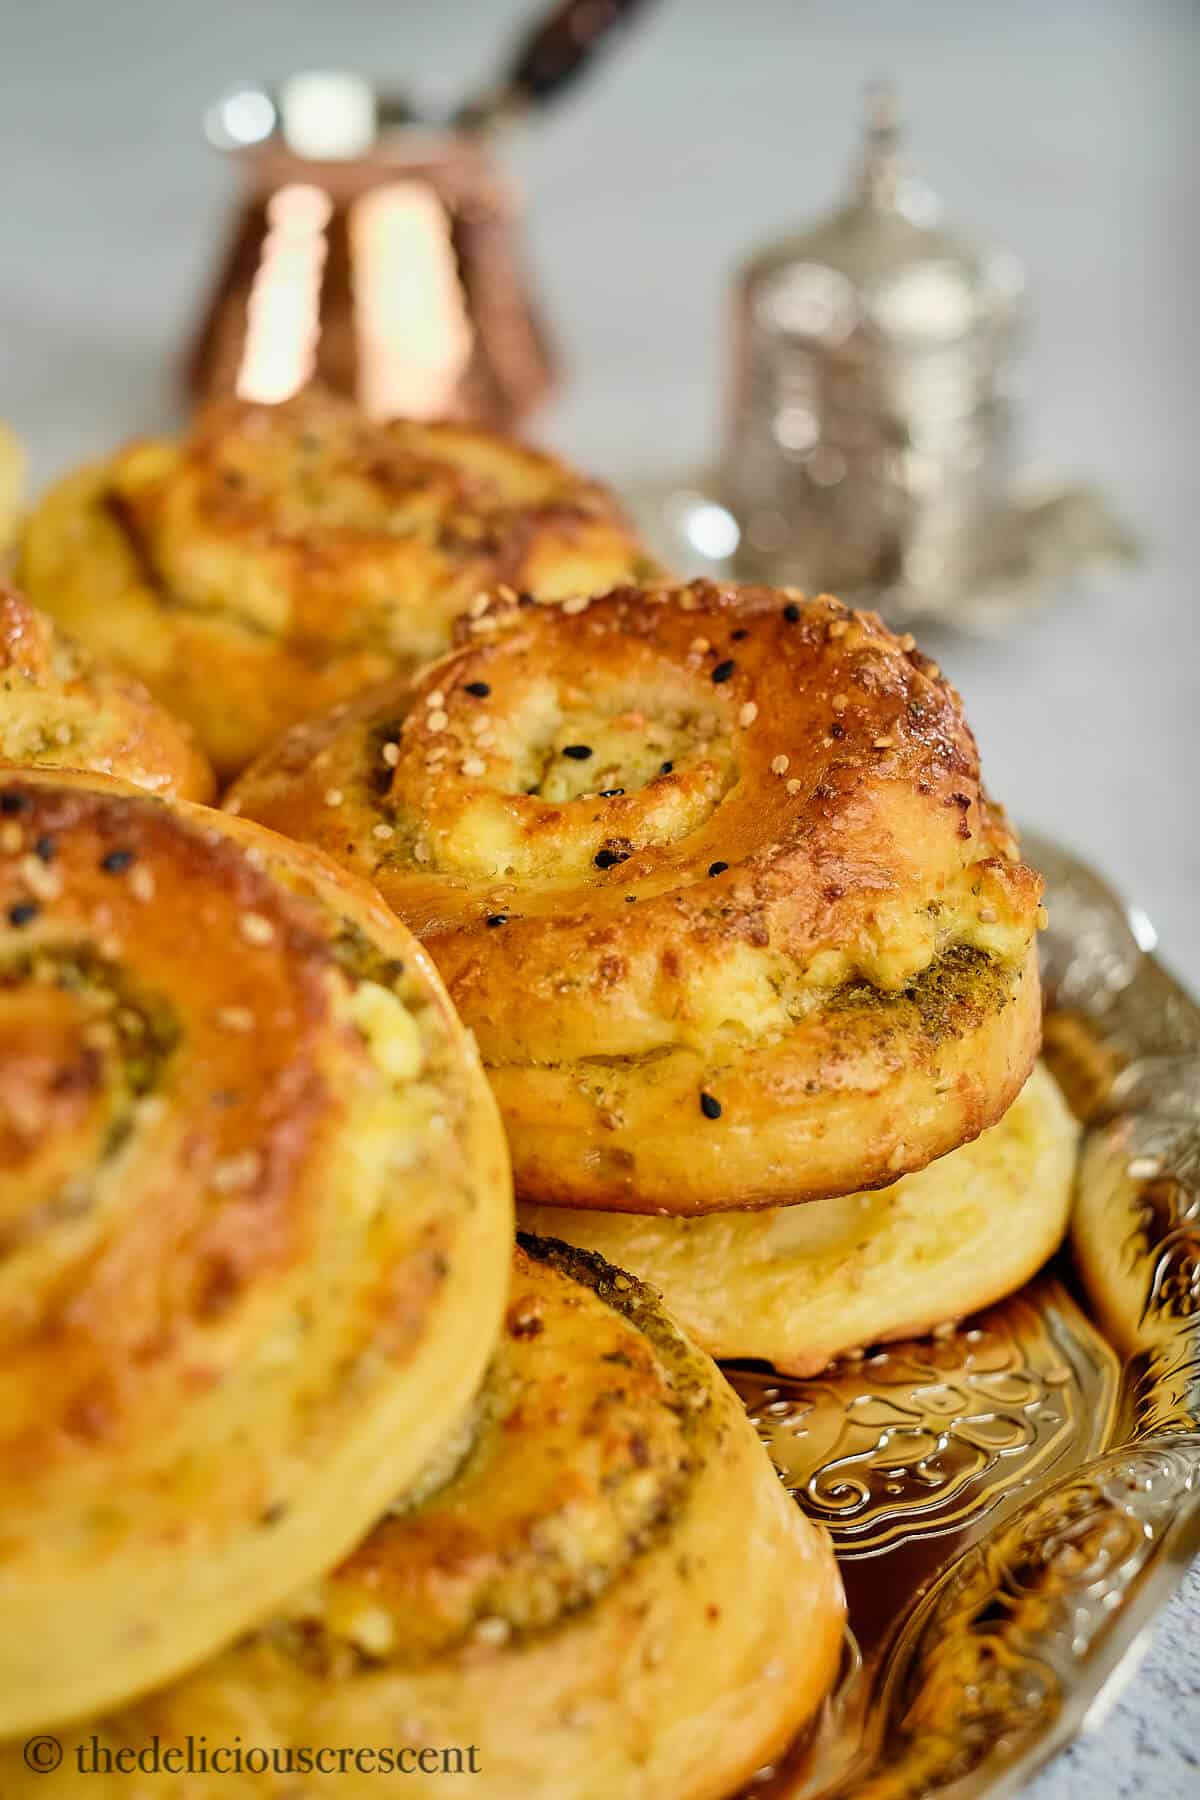 Bread rolls with cheese and zaatar served on a table.